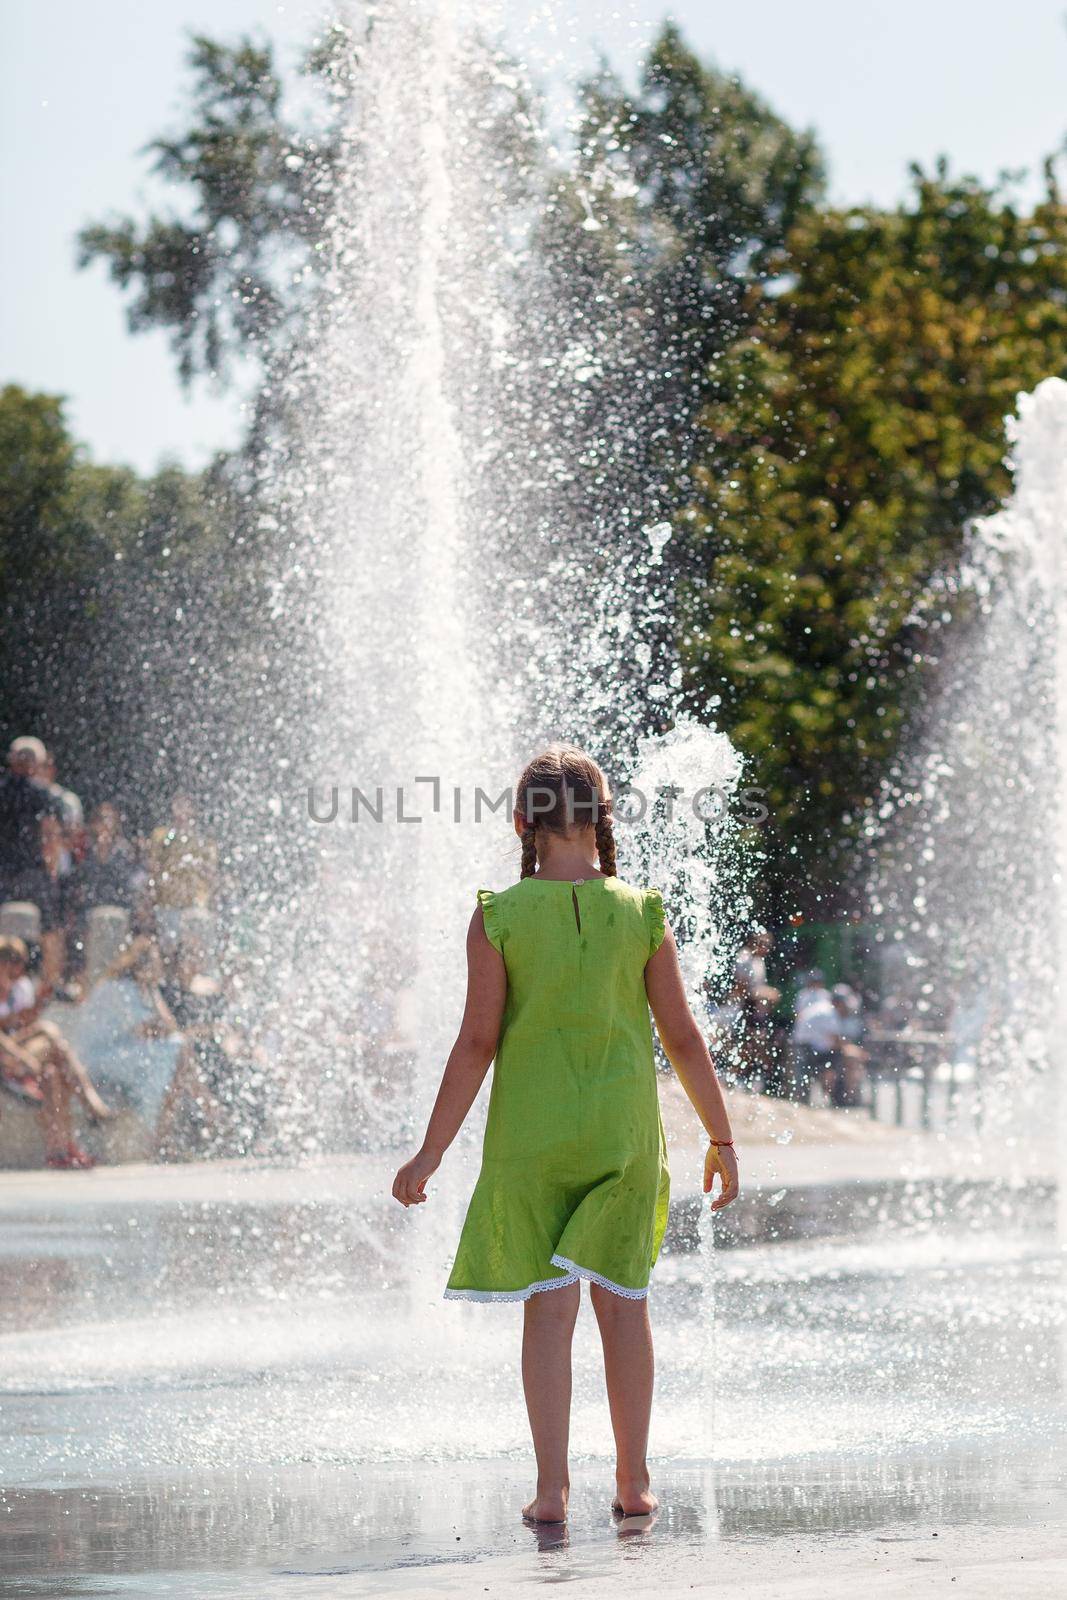 A young girl in a light green dress barefoot dances by a fountain in the city center. by Lincikas